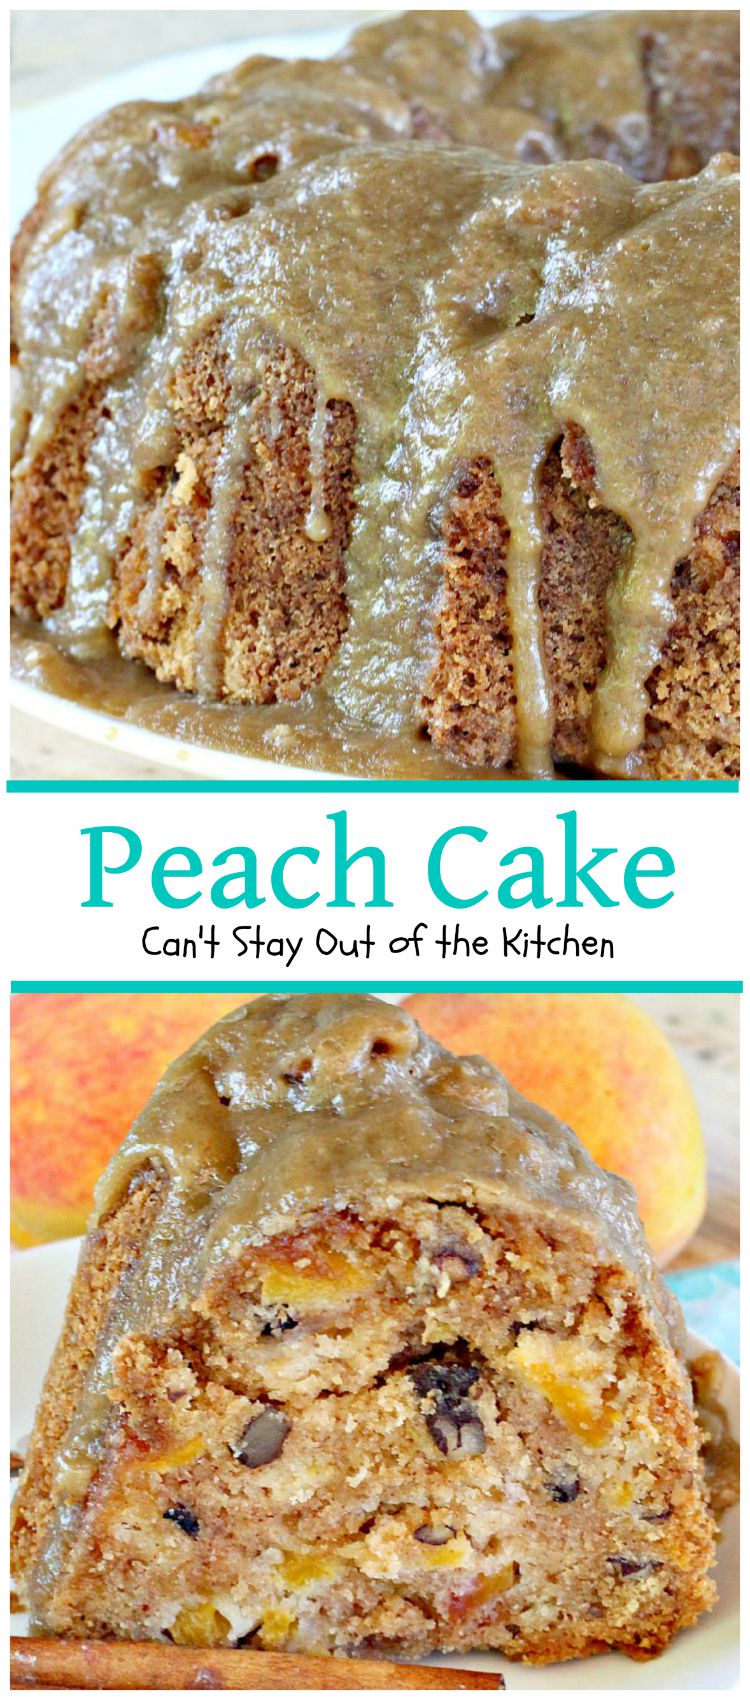 Peach Cake | Can't Stay Out of the Kitchen